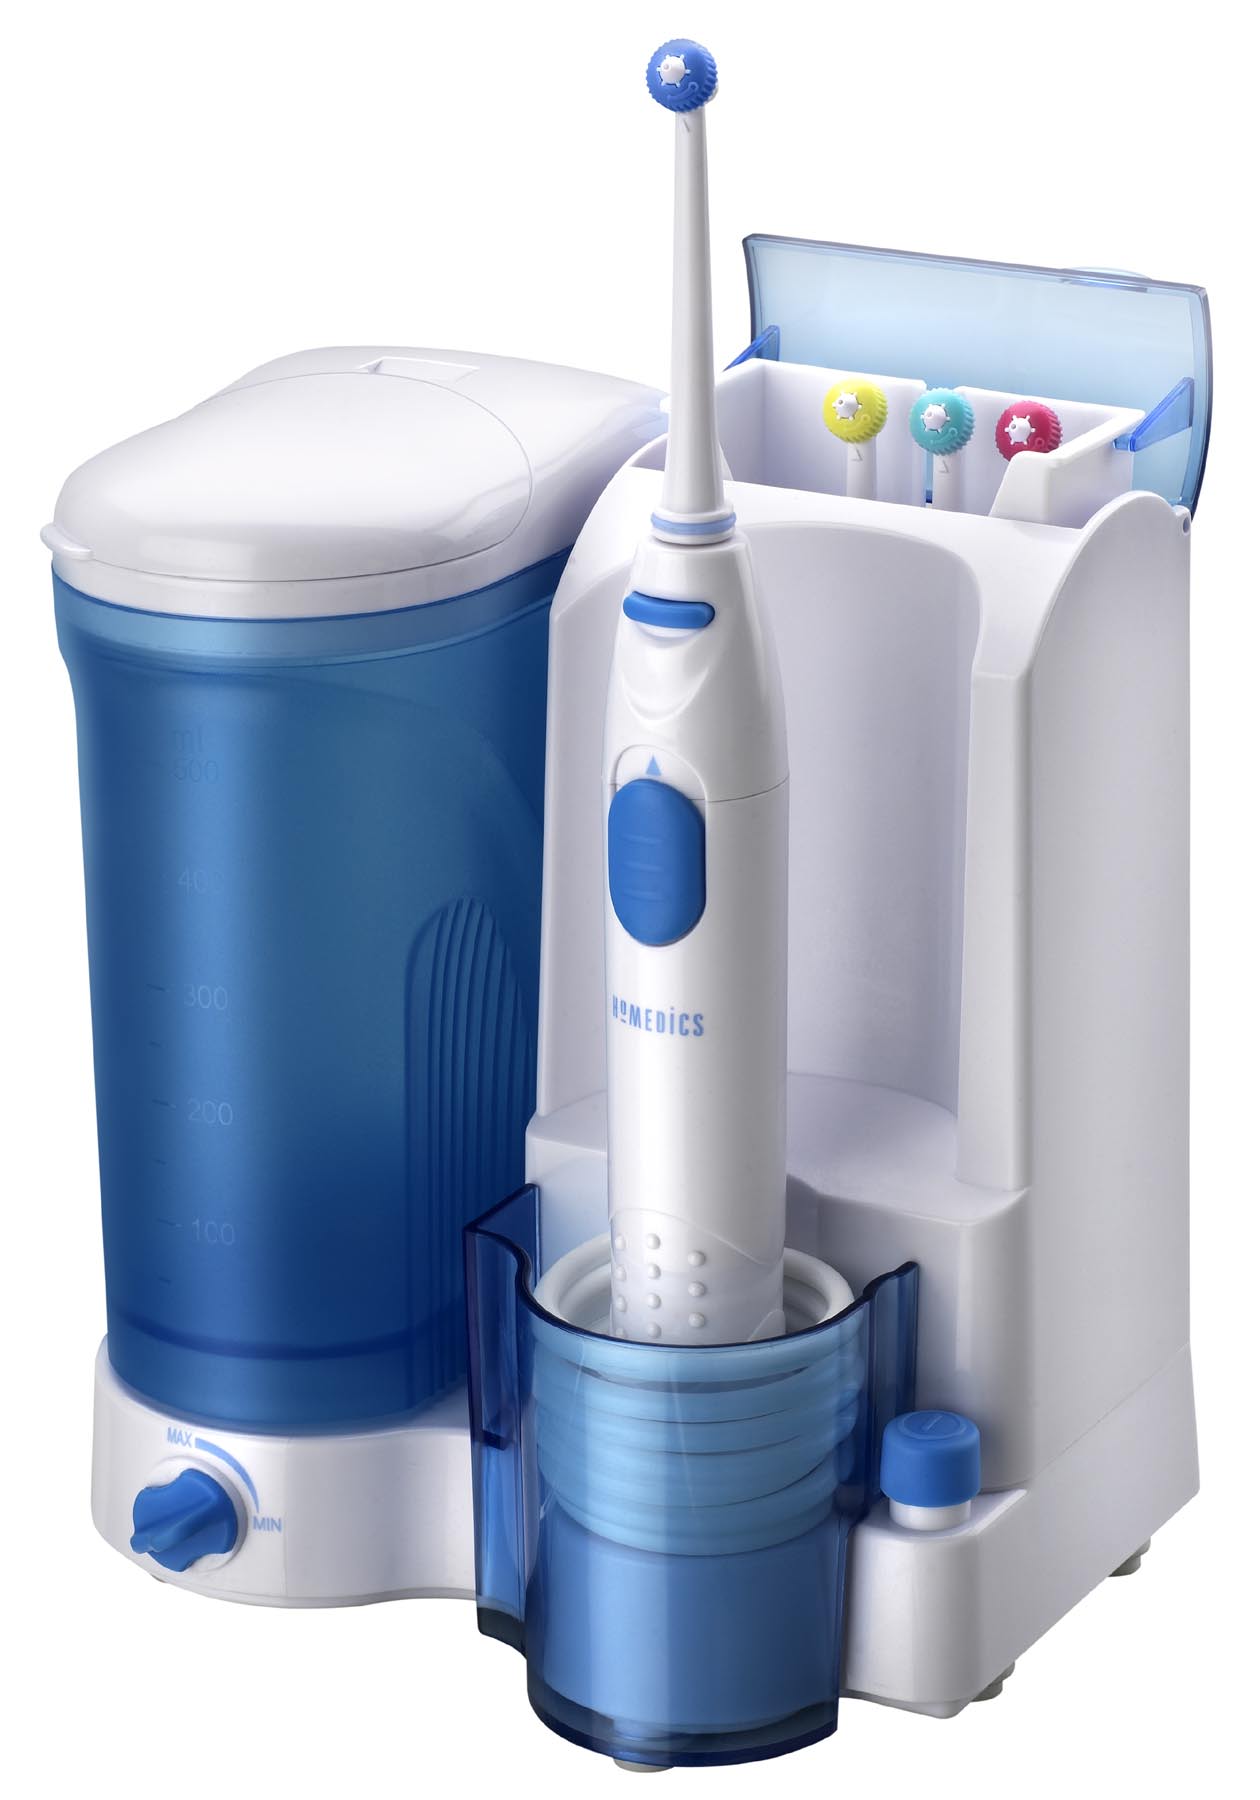 Homedics HD-IRR PowerDent Oral Irrigator Instruction Manual and Warranty Information